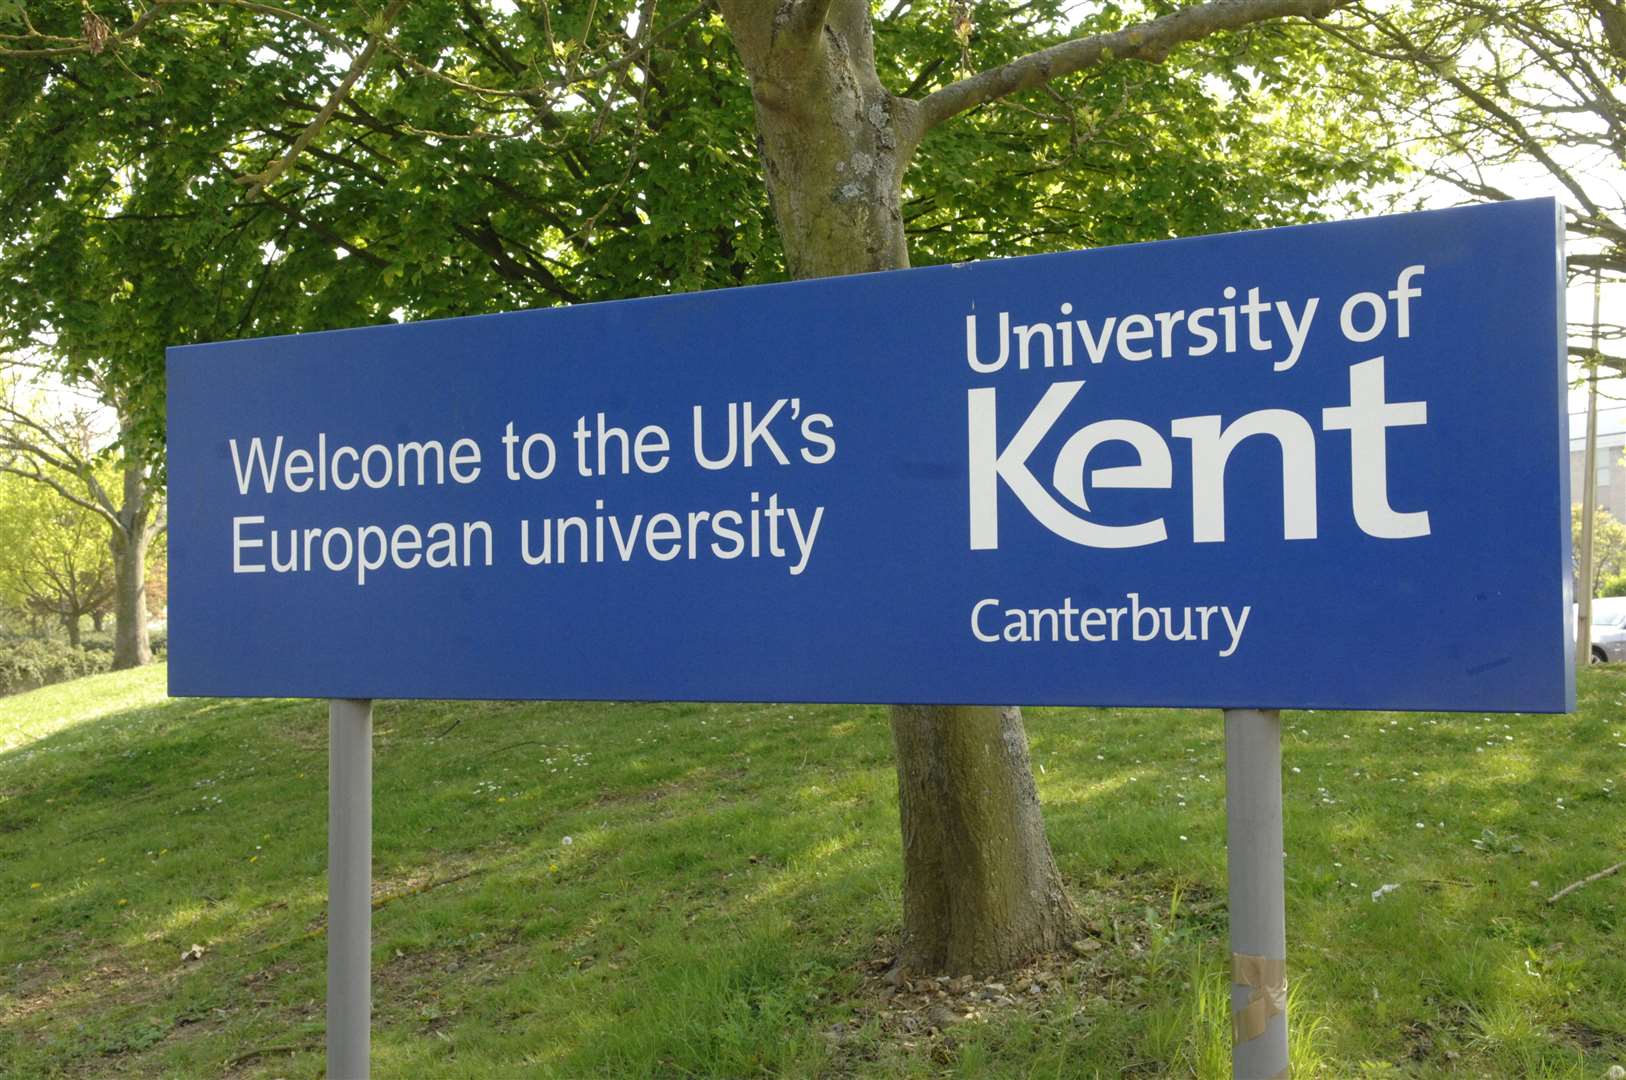 The University of Kent was also impacted by the Blackbaud breach